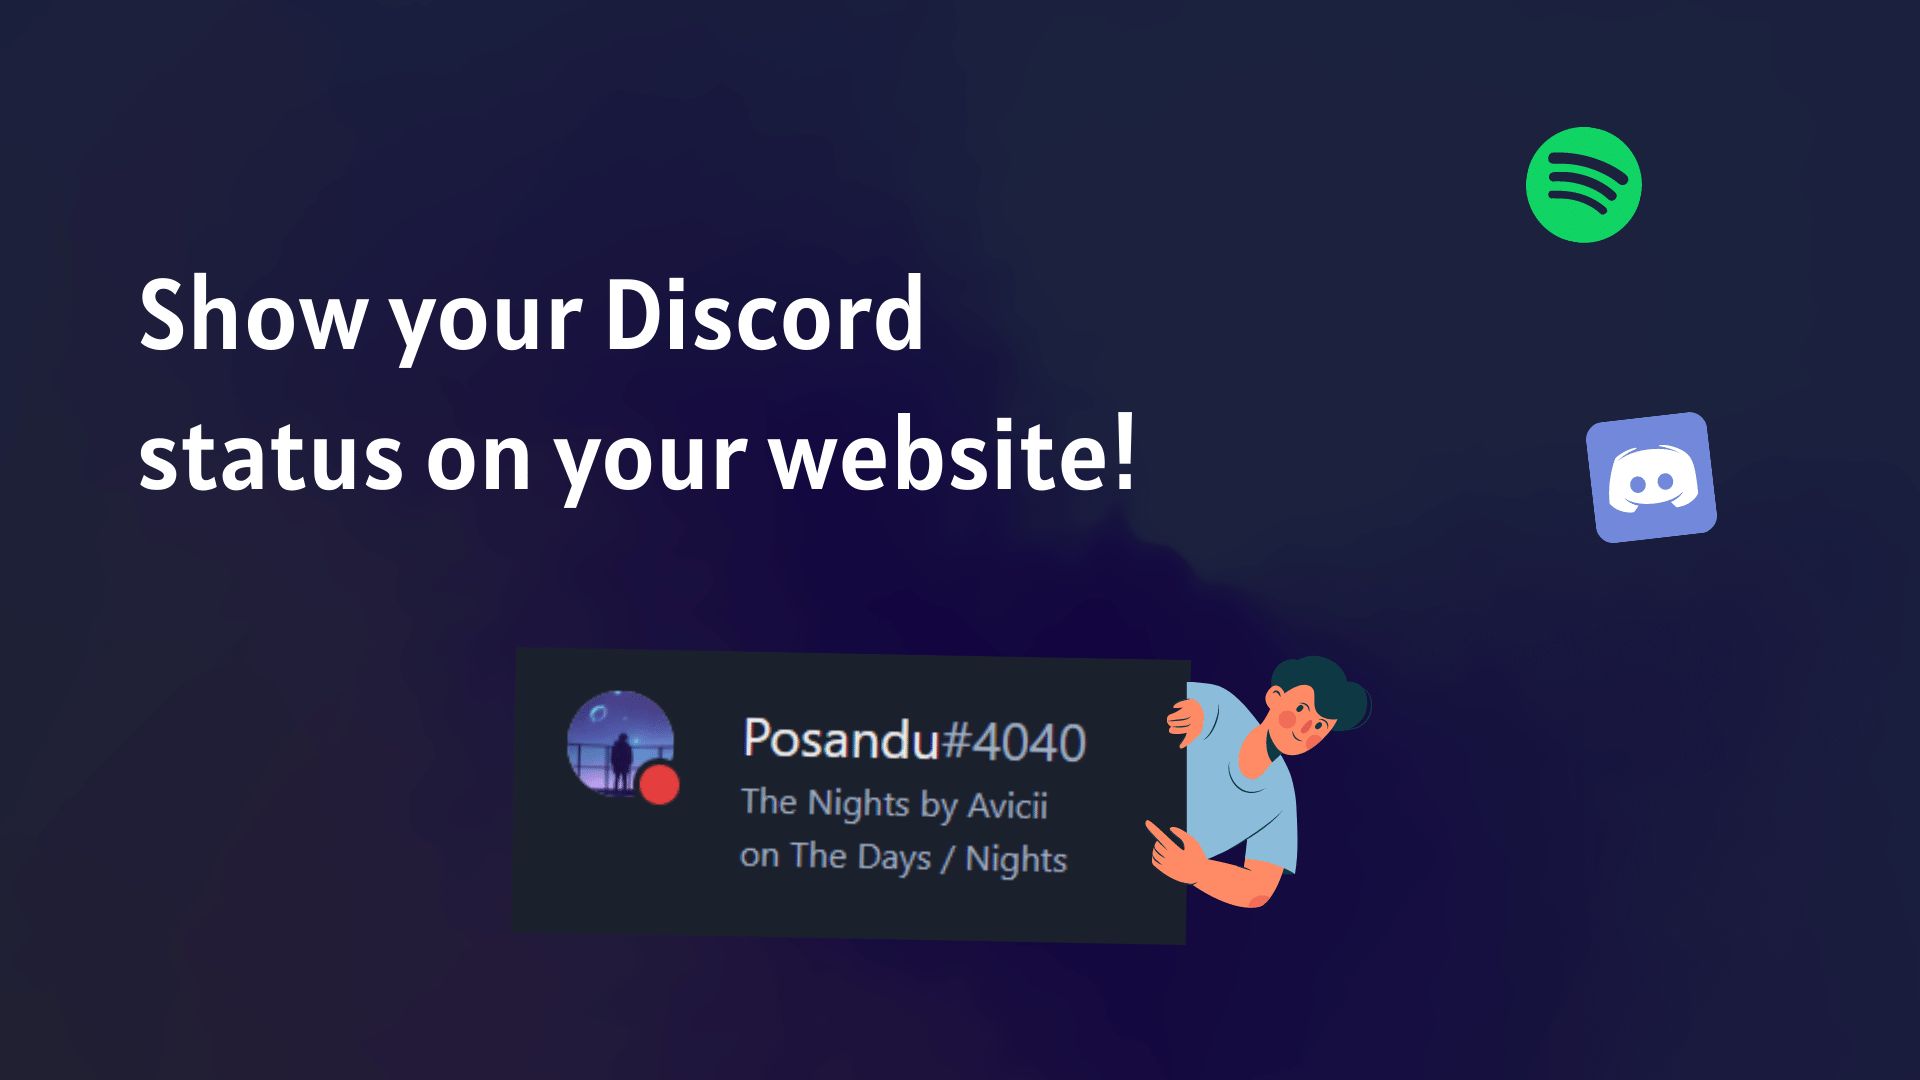 Adding your discord status to a website image